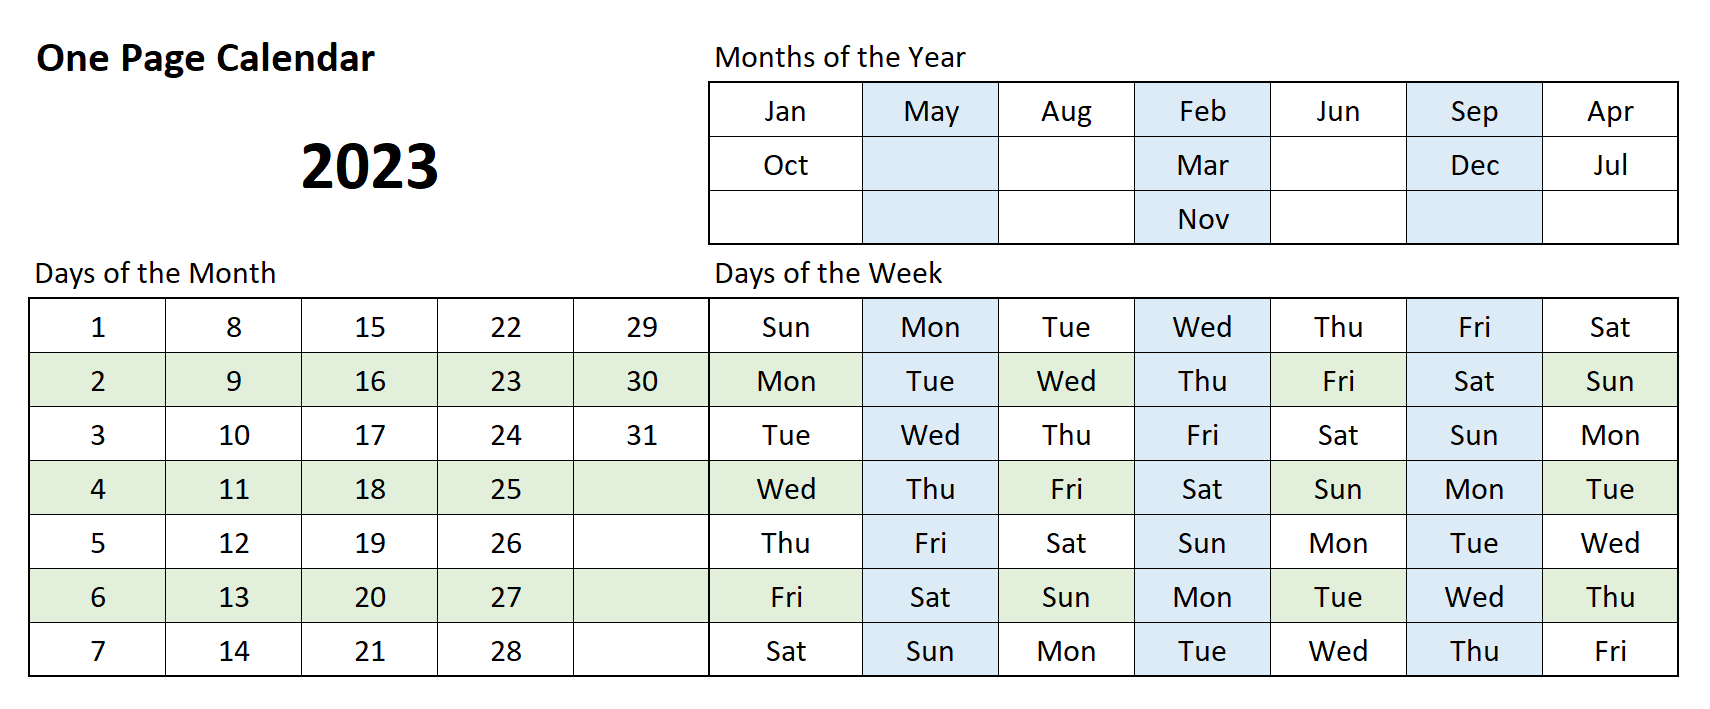 Building a One-Page Calendar